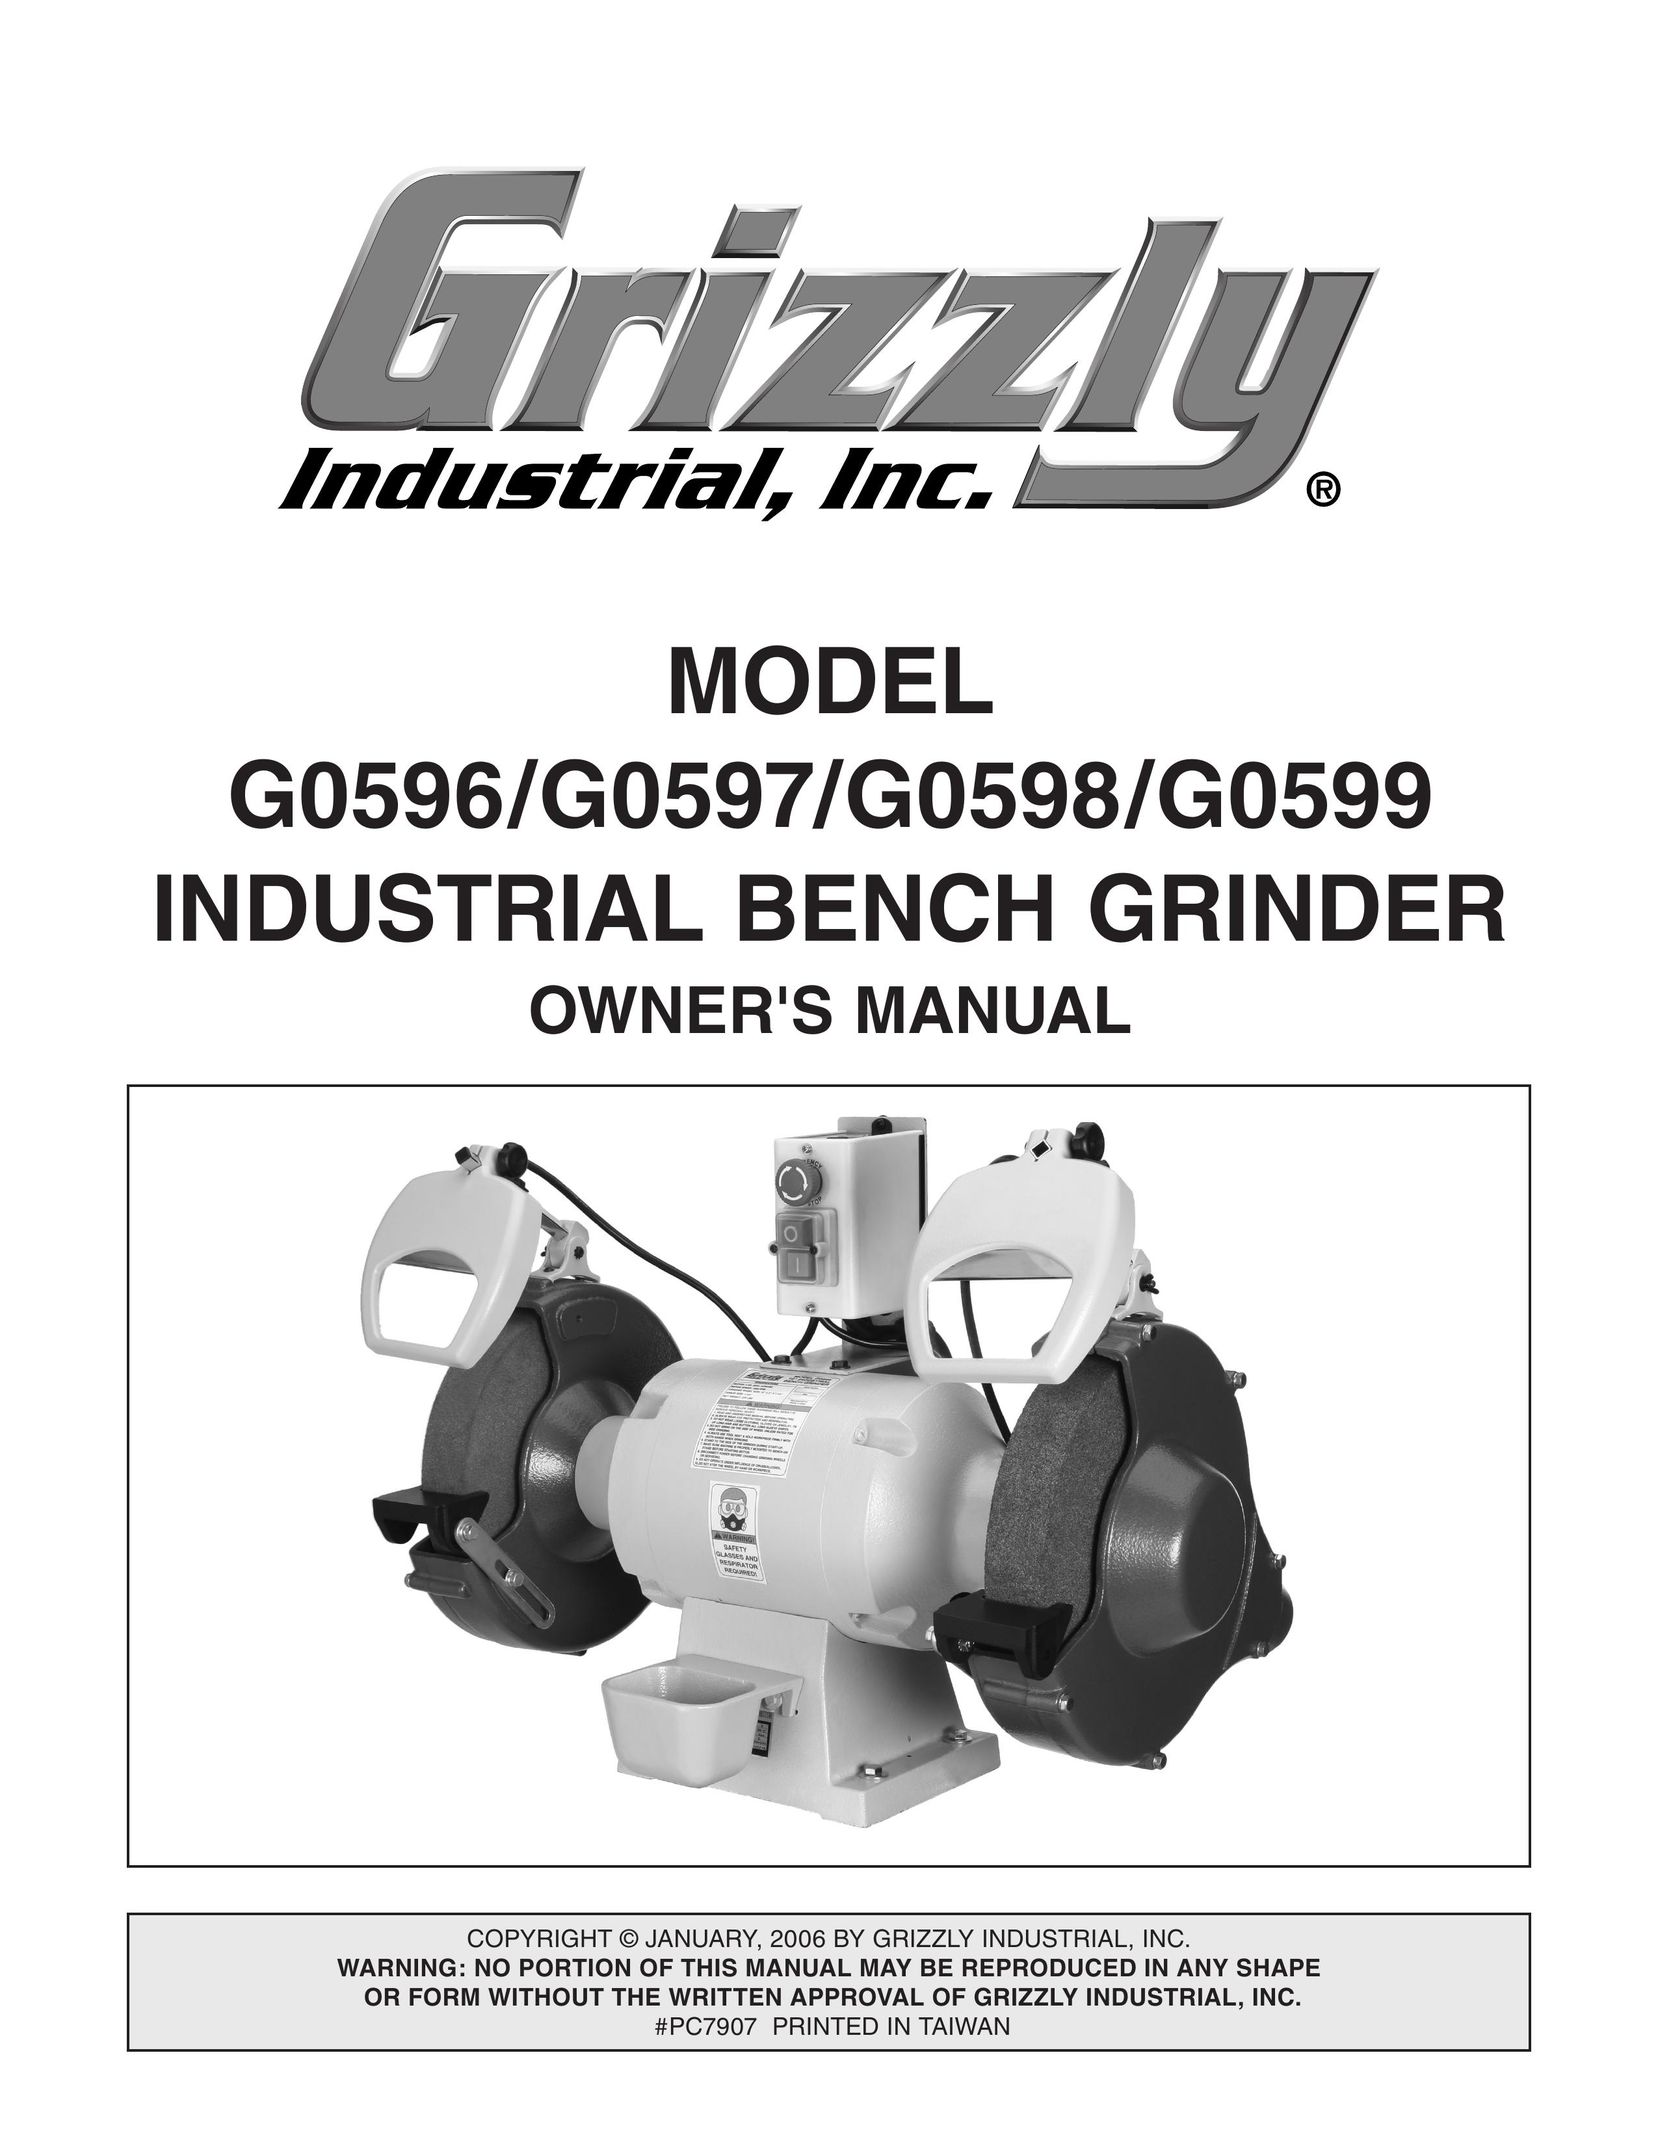 Grizzly G0597 Grinder User Manual